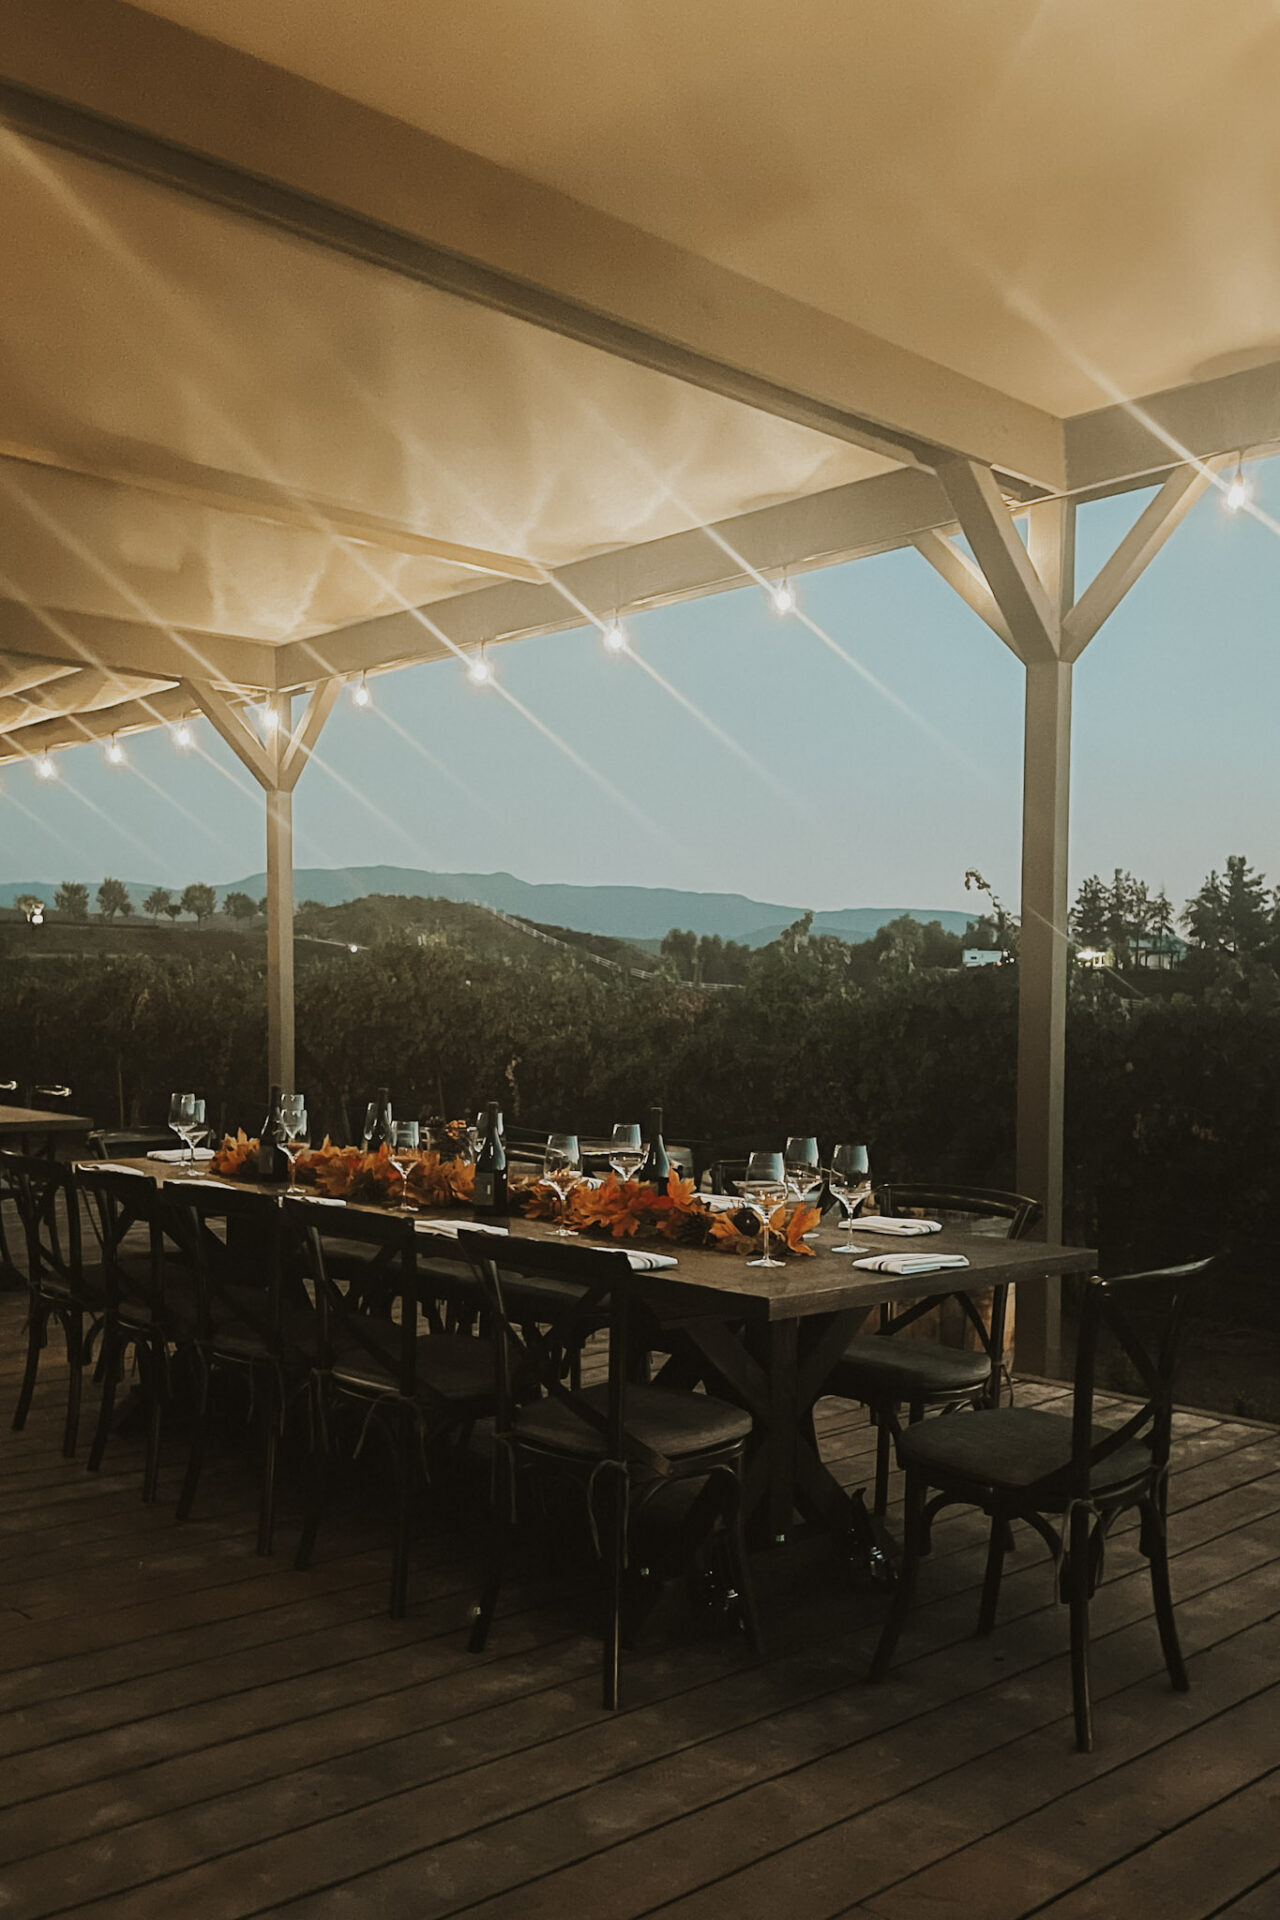 Dining under the stars, surrounded by vineyards at Leoness Cellars in Temecula